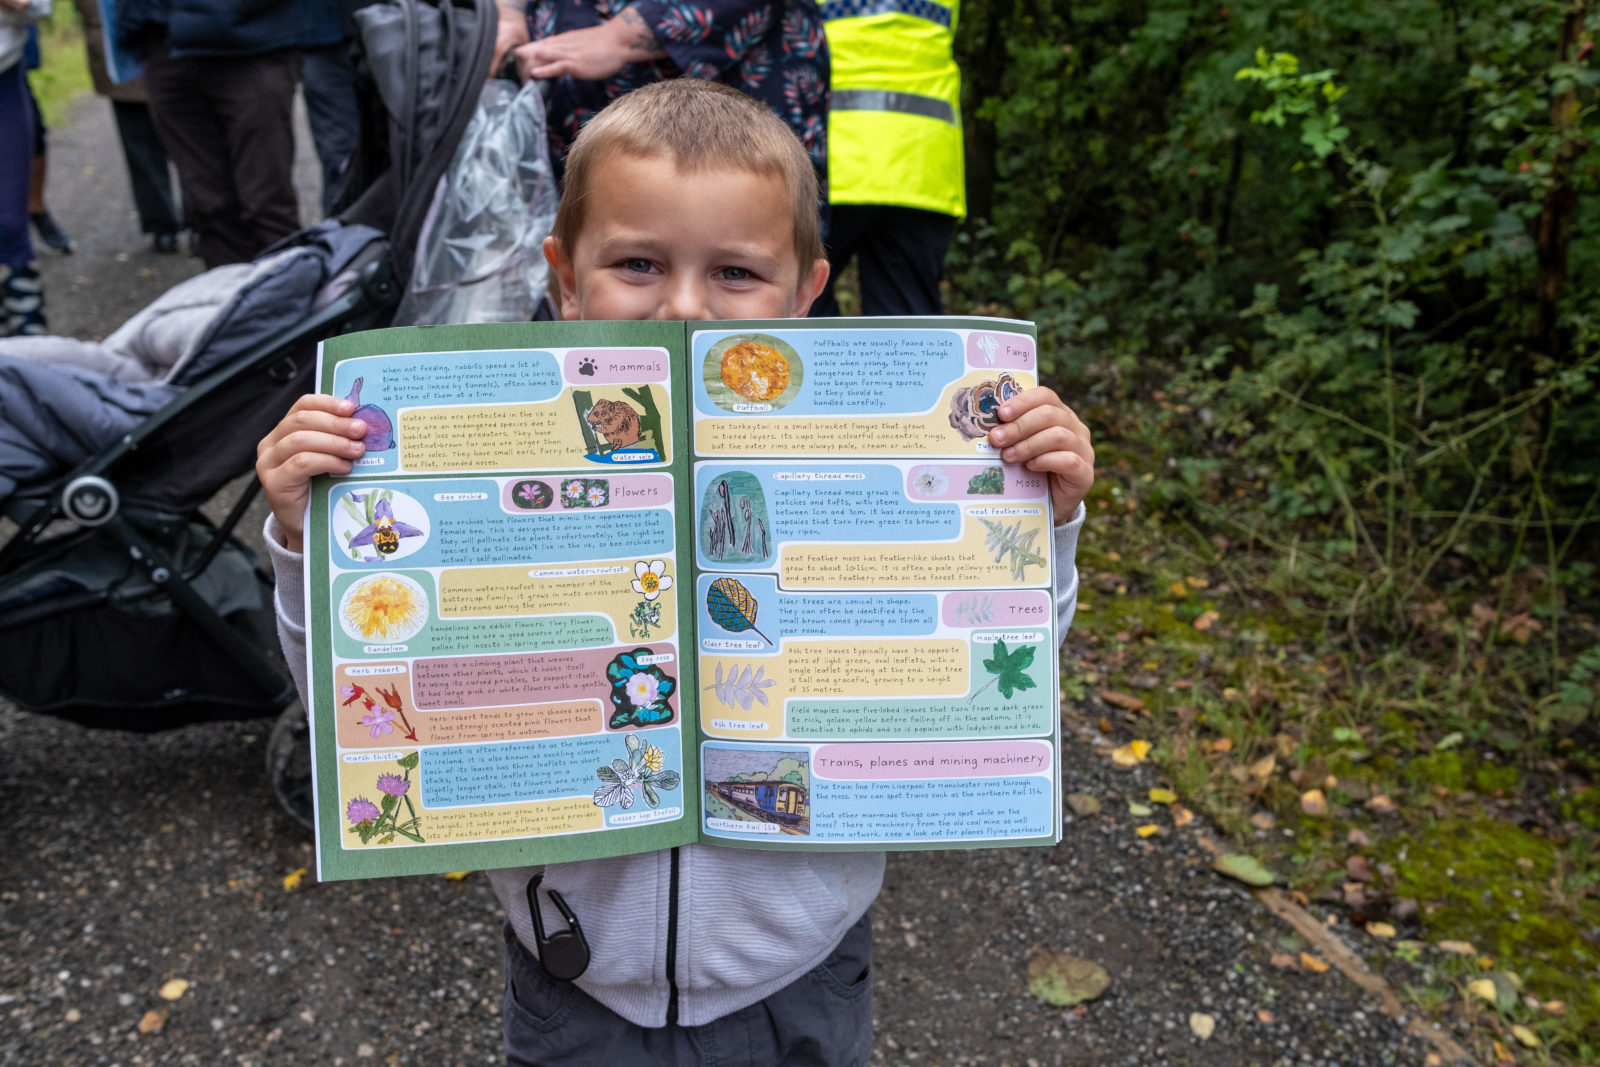 Photograph of a child holding open a colourful activity book